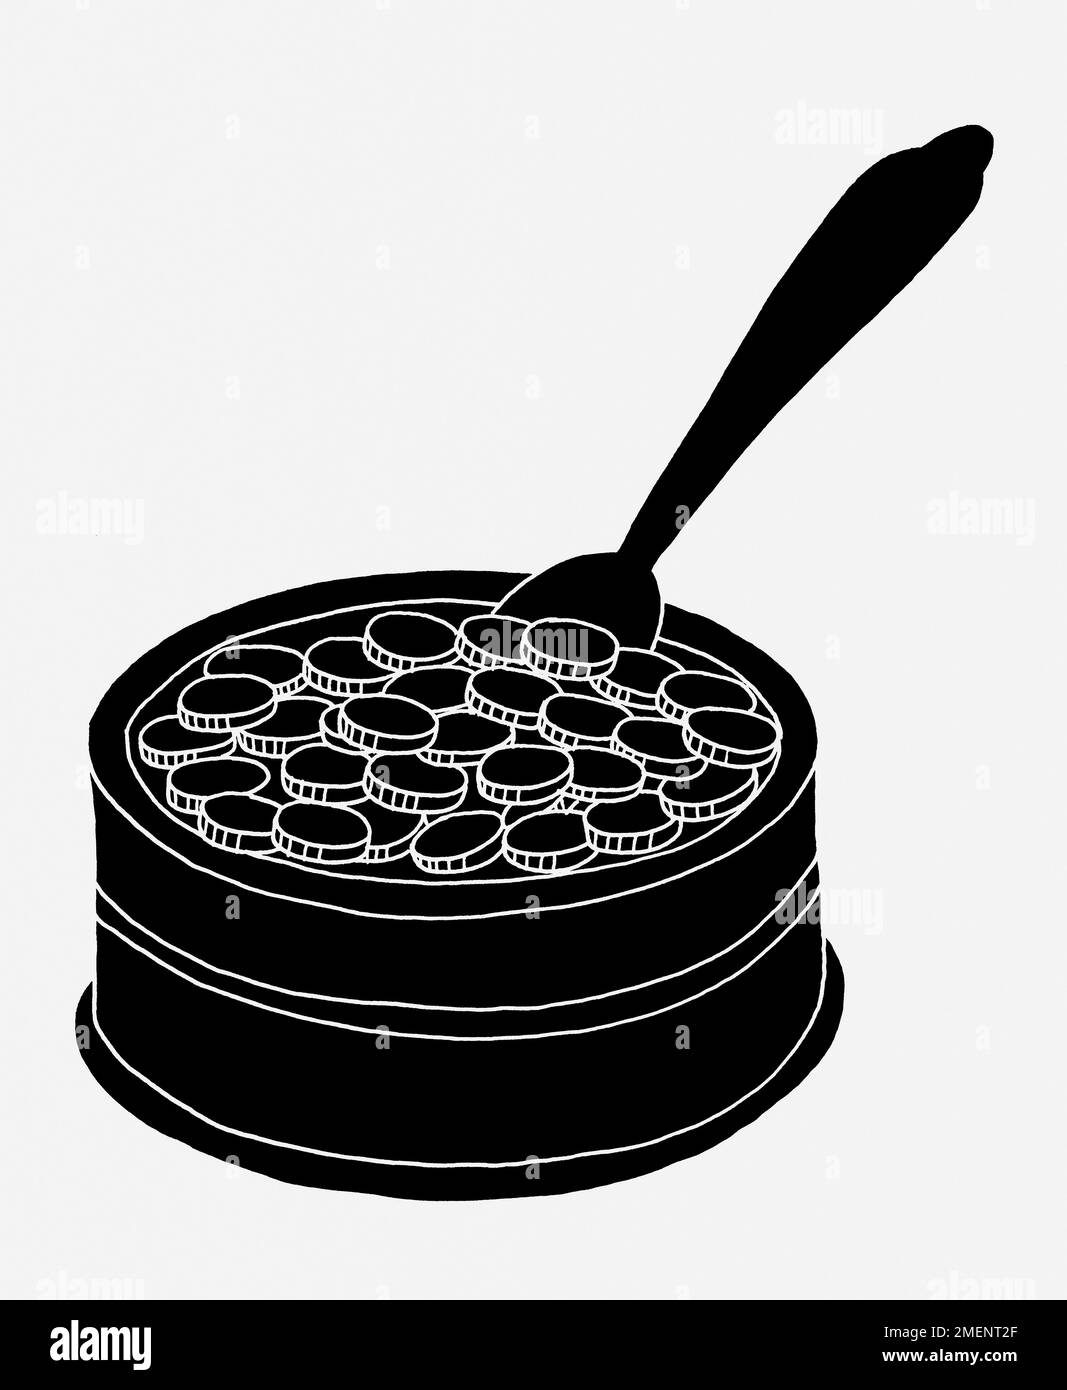 Black and white illustration of tin of caviar containing coins instead of caviar Stock Photo